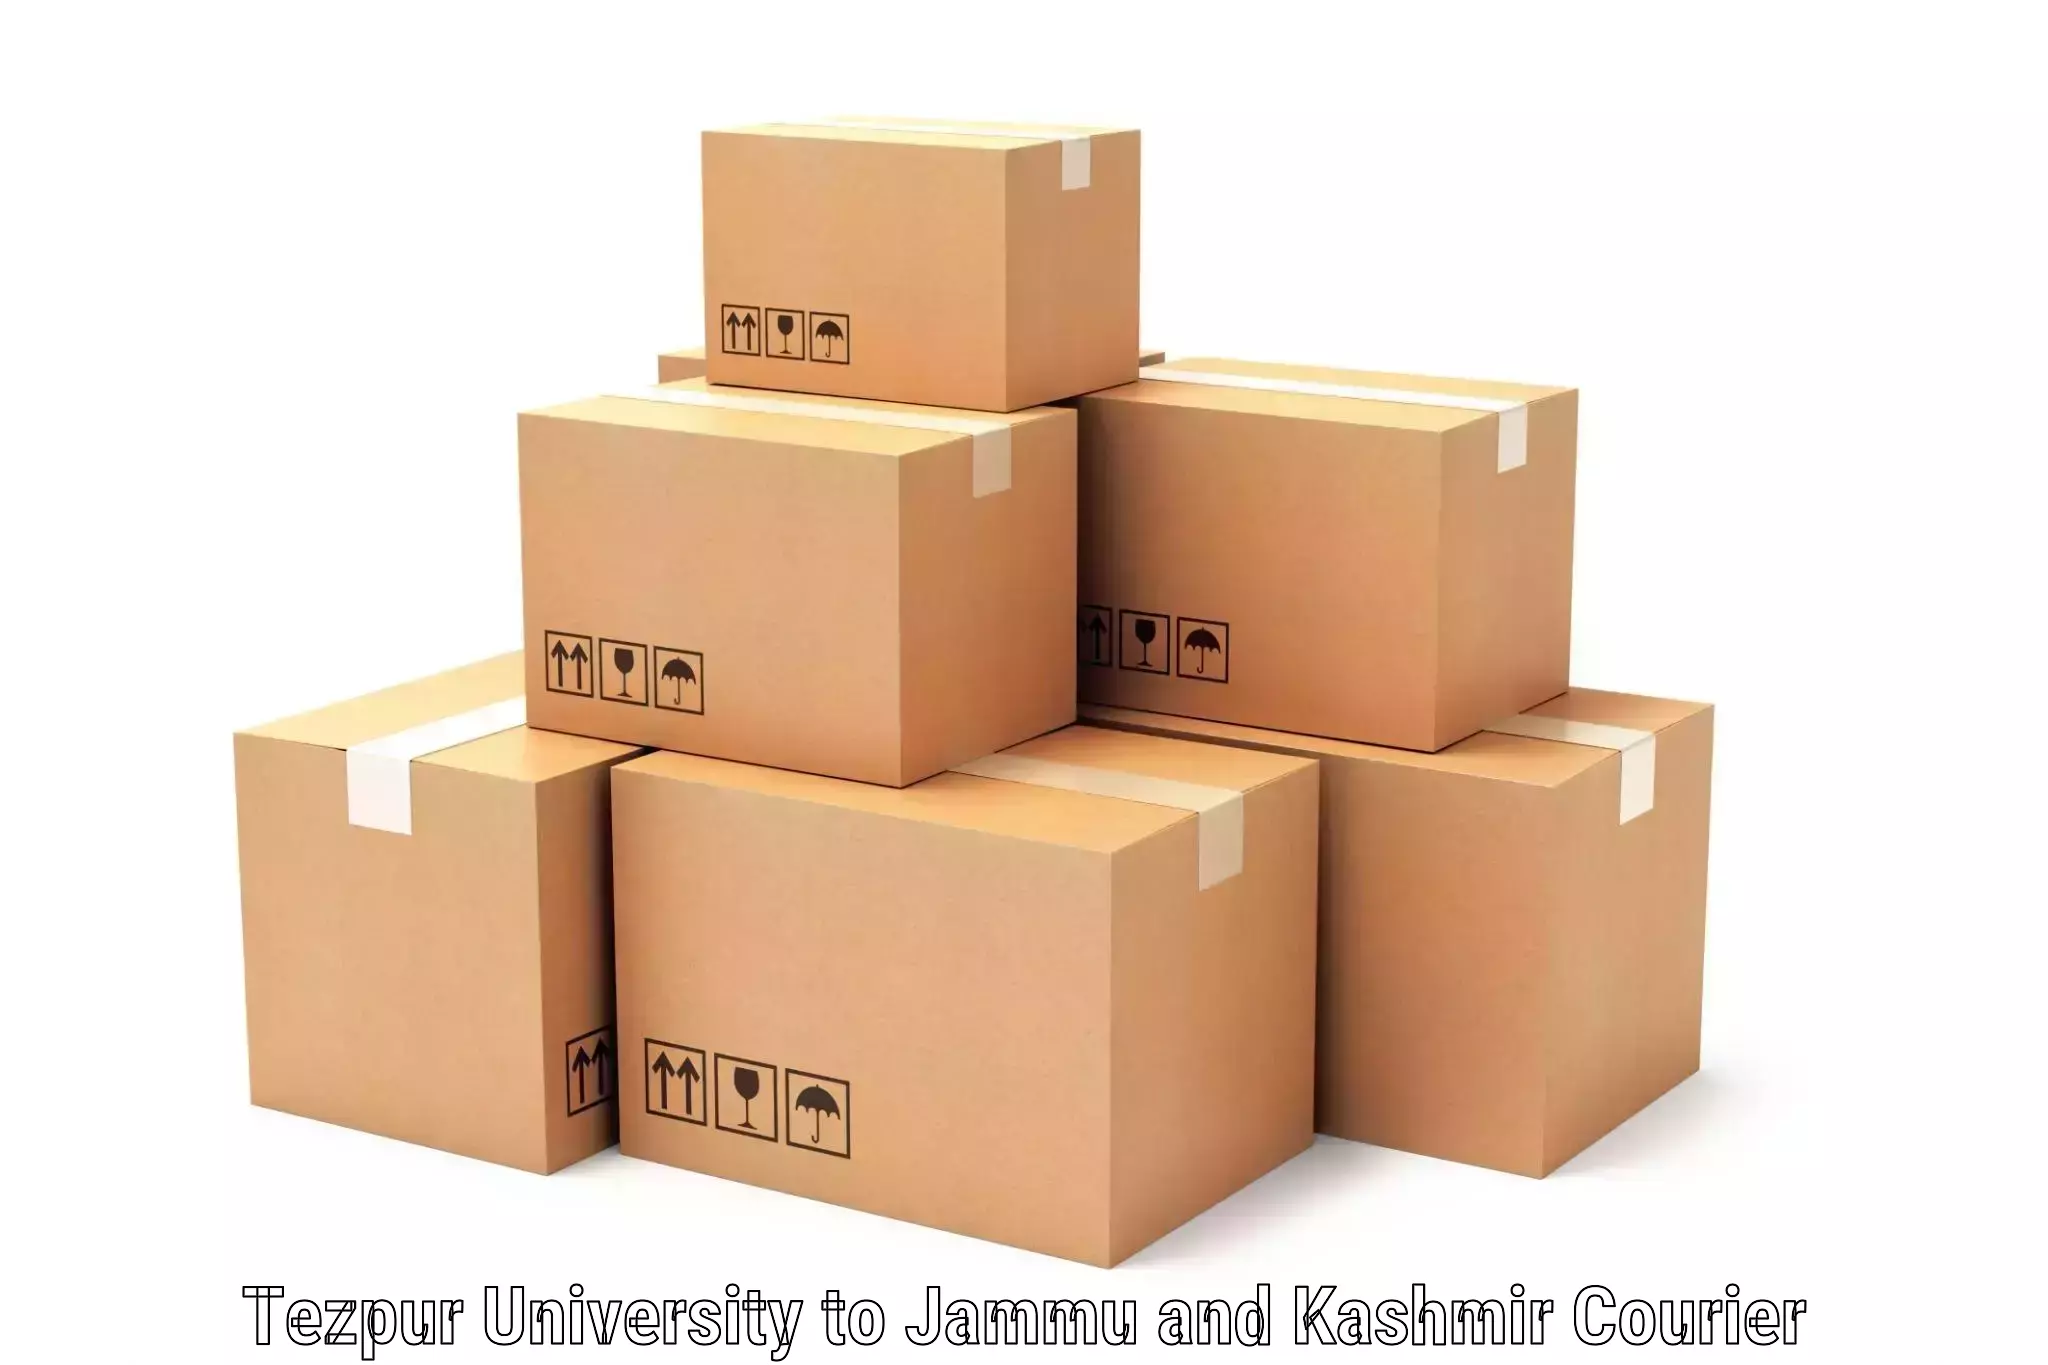 High-priority parcel service Tezpur University to Jammu and Kashmir